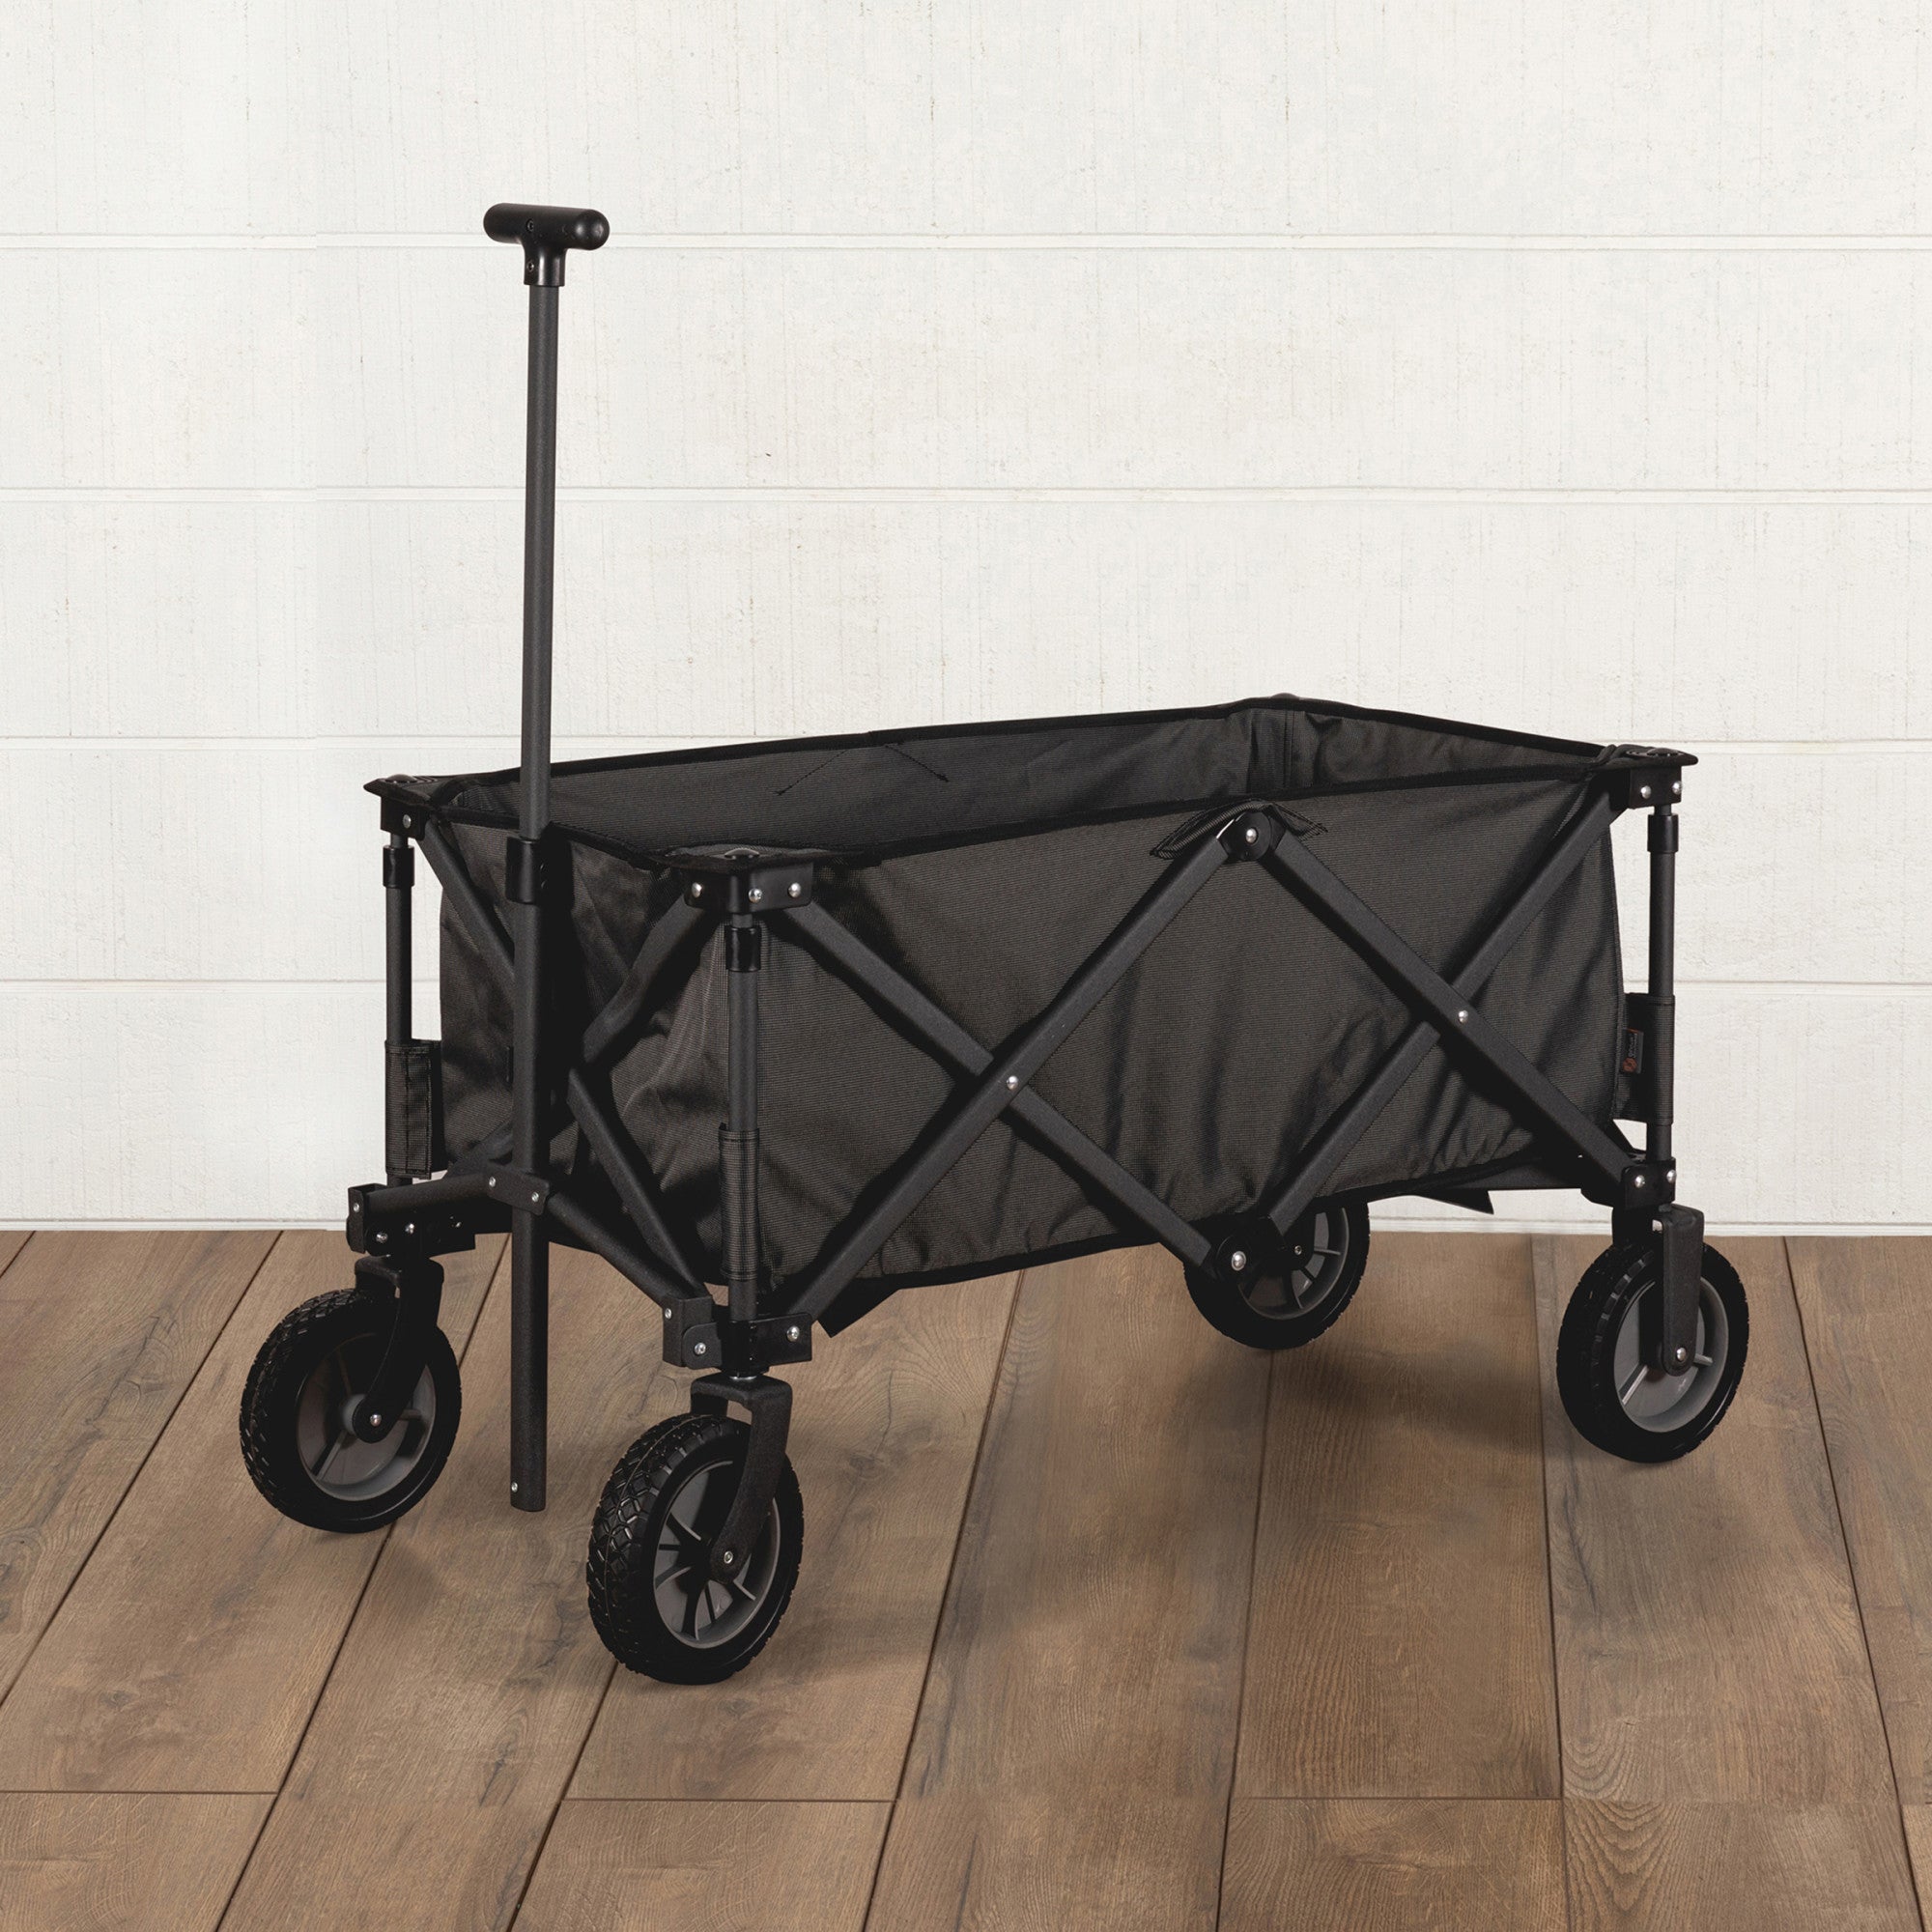 Collapsible Foldable Beach Wagon Cart with 200LBS (Max) Weight